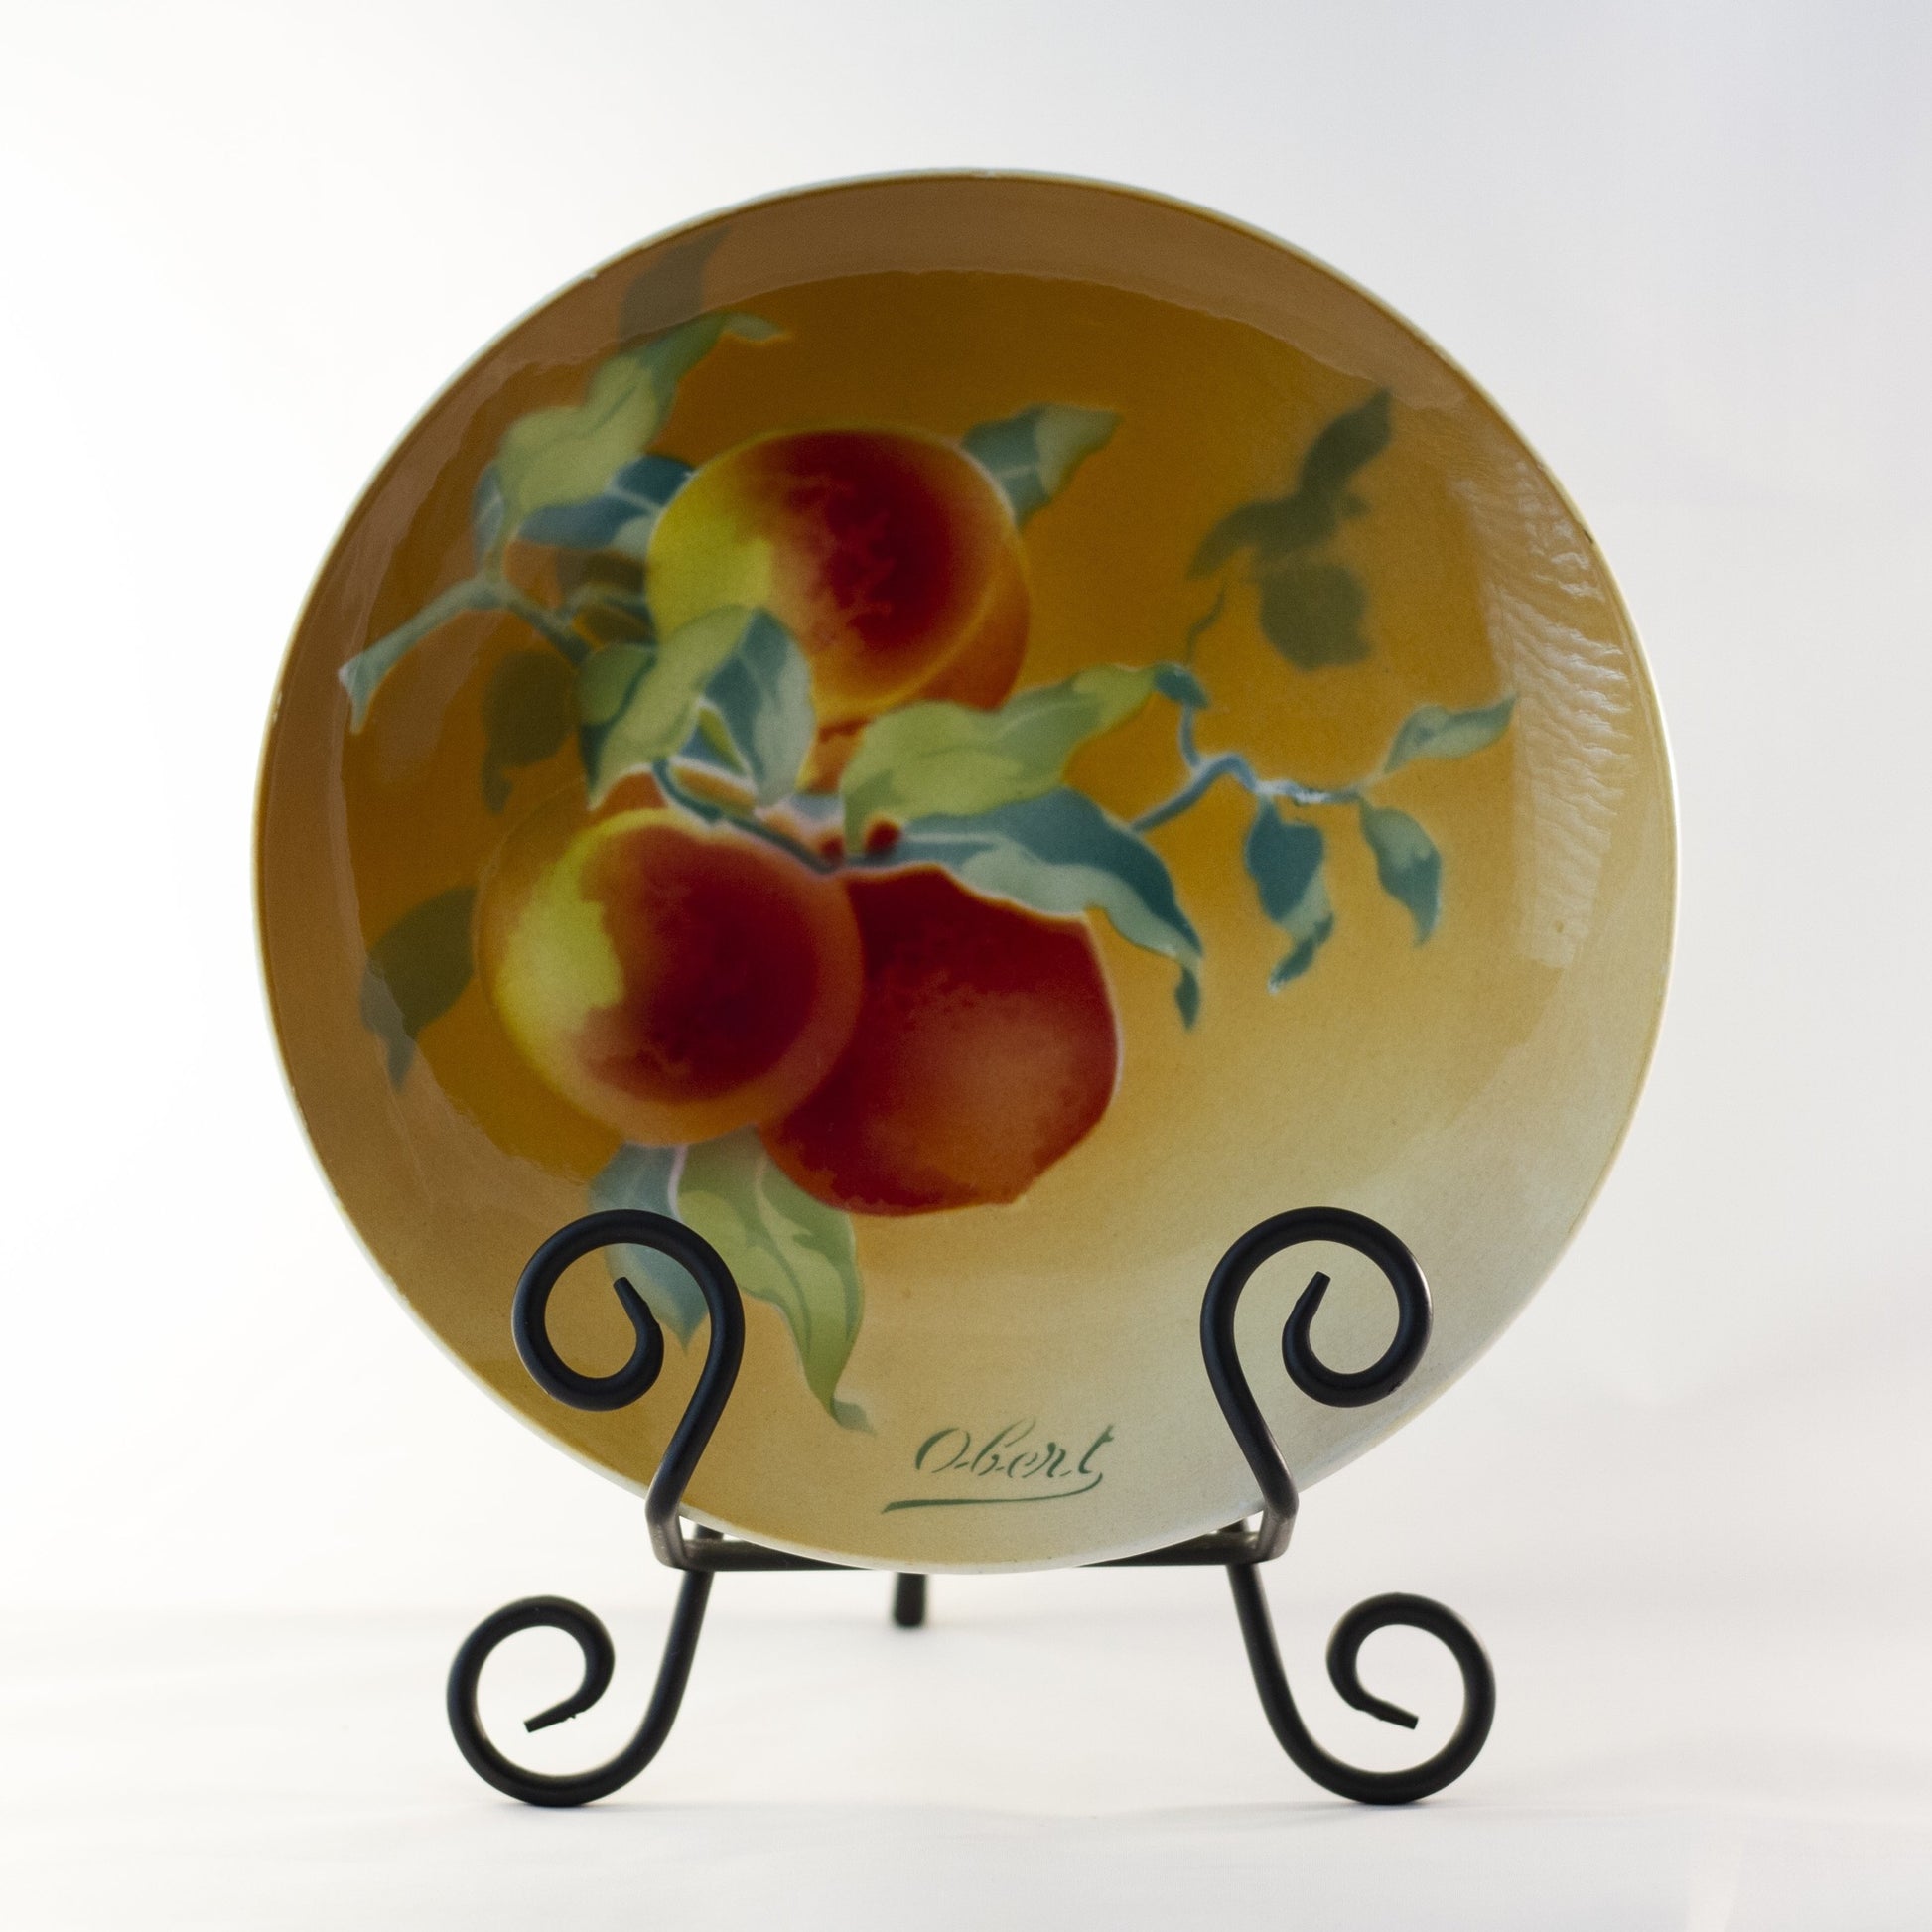 K & G LUNÉVILLE FRENCH FAIENCE PLATE HAND PAINTED PEACHES 8 ½” Signed Obert Circa 1900